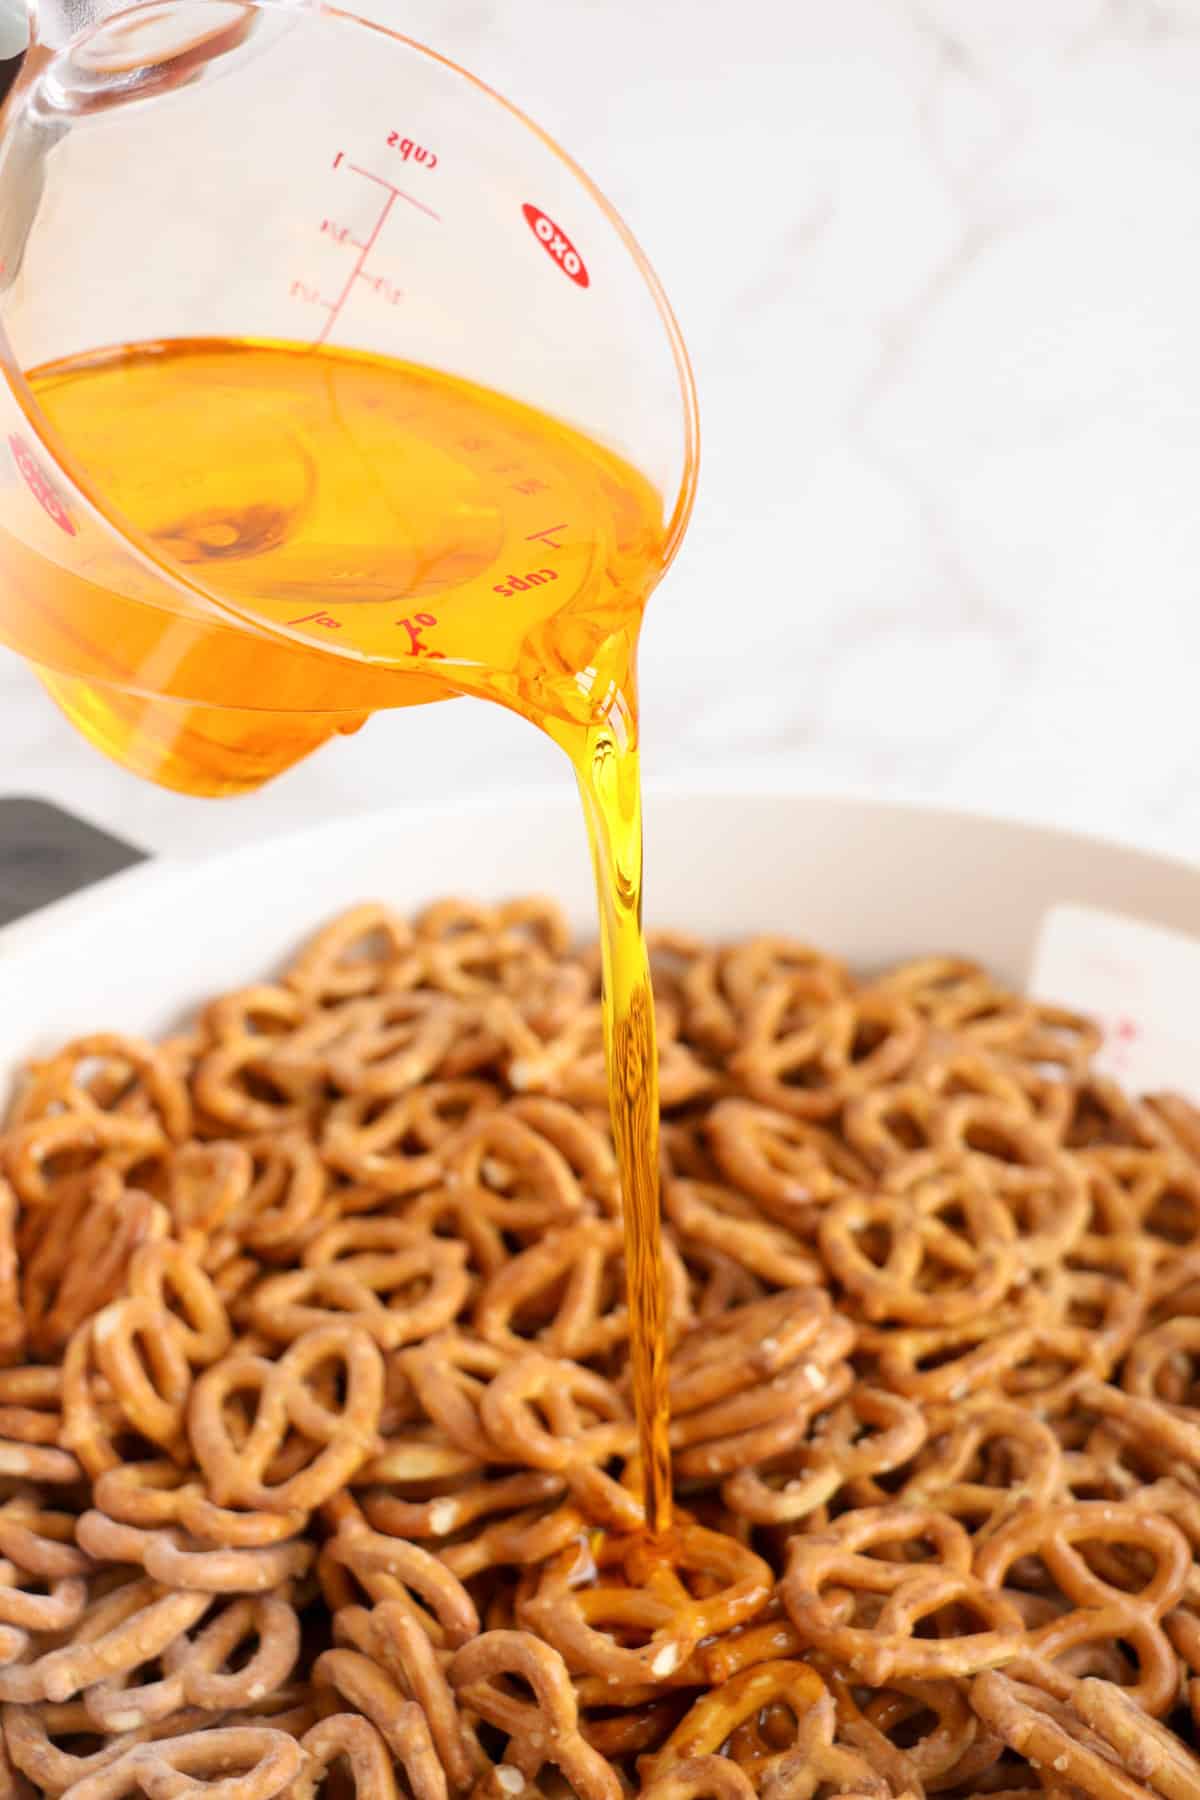 Popcorn oil being poured into bowl of pretzels.